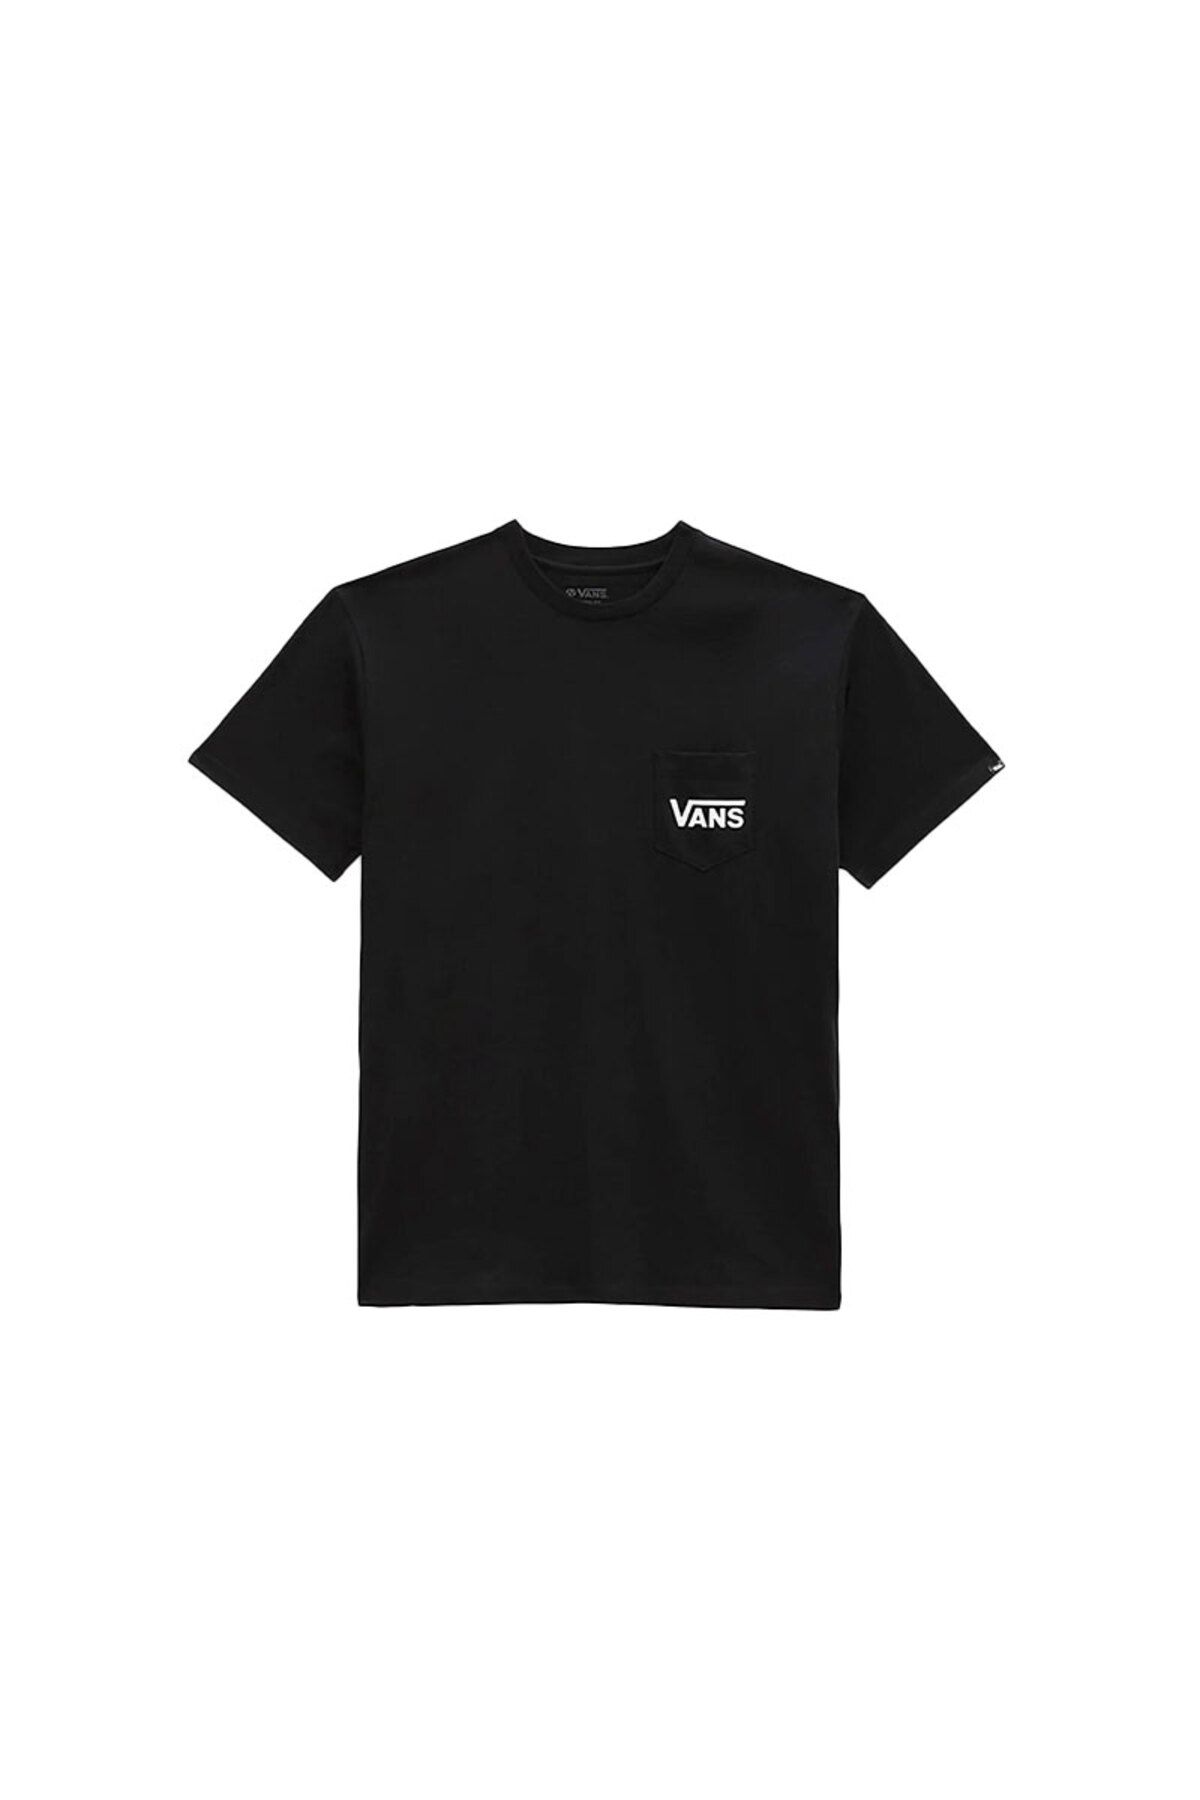 Vans Style 76 Back Ss Tee